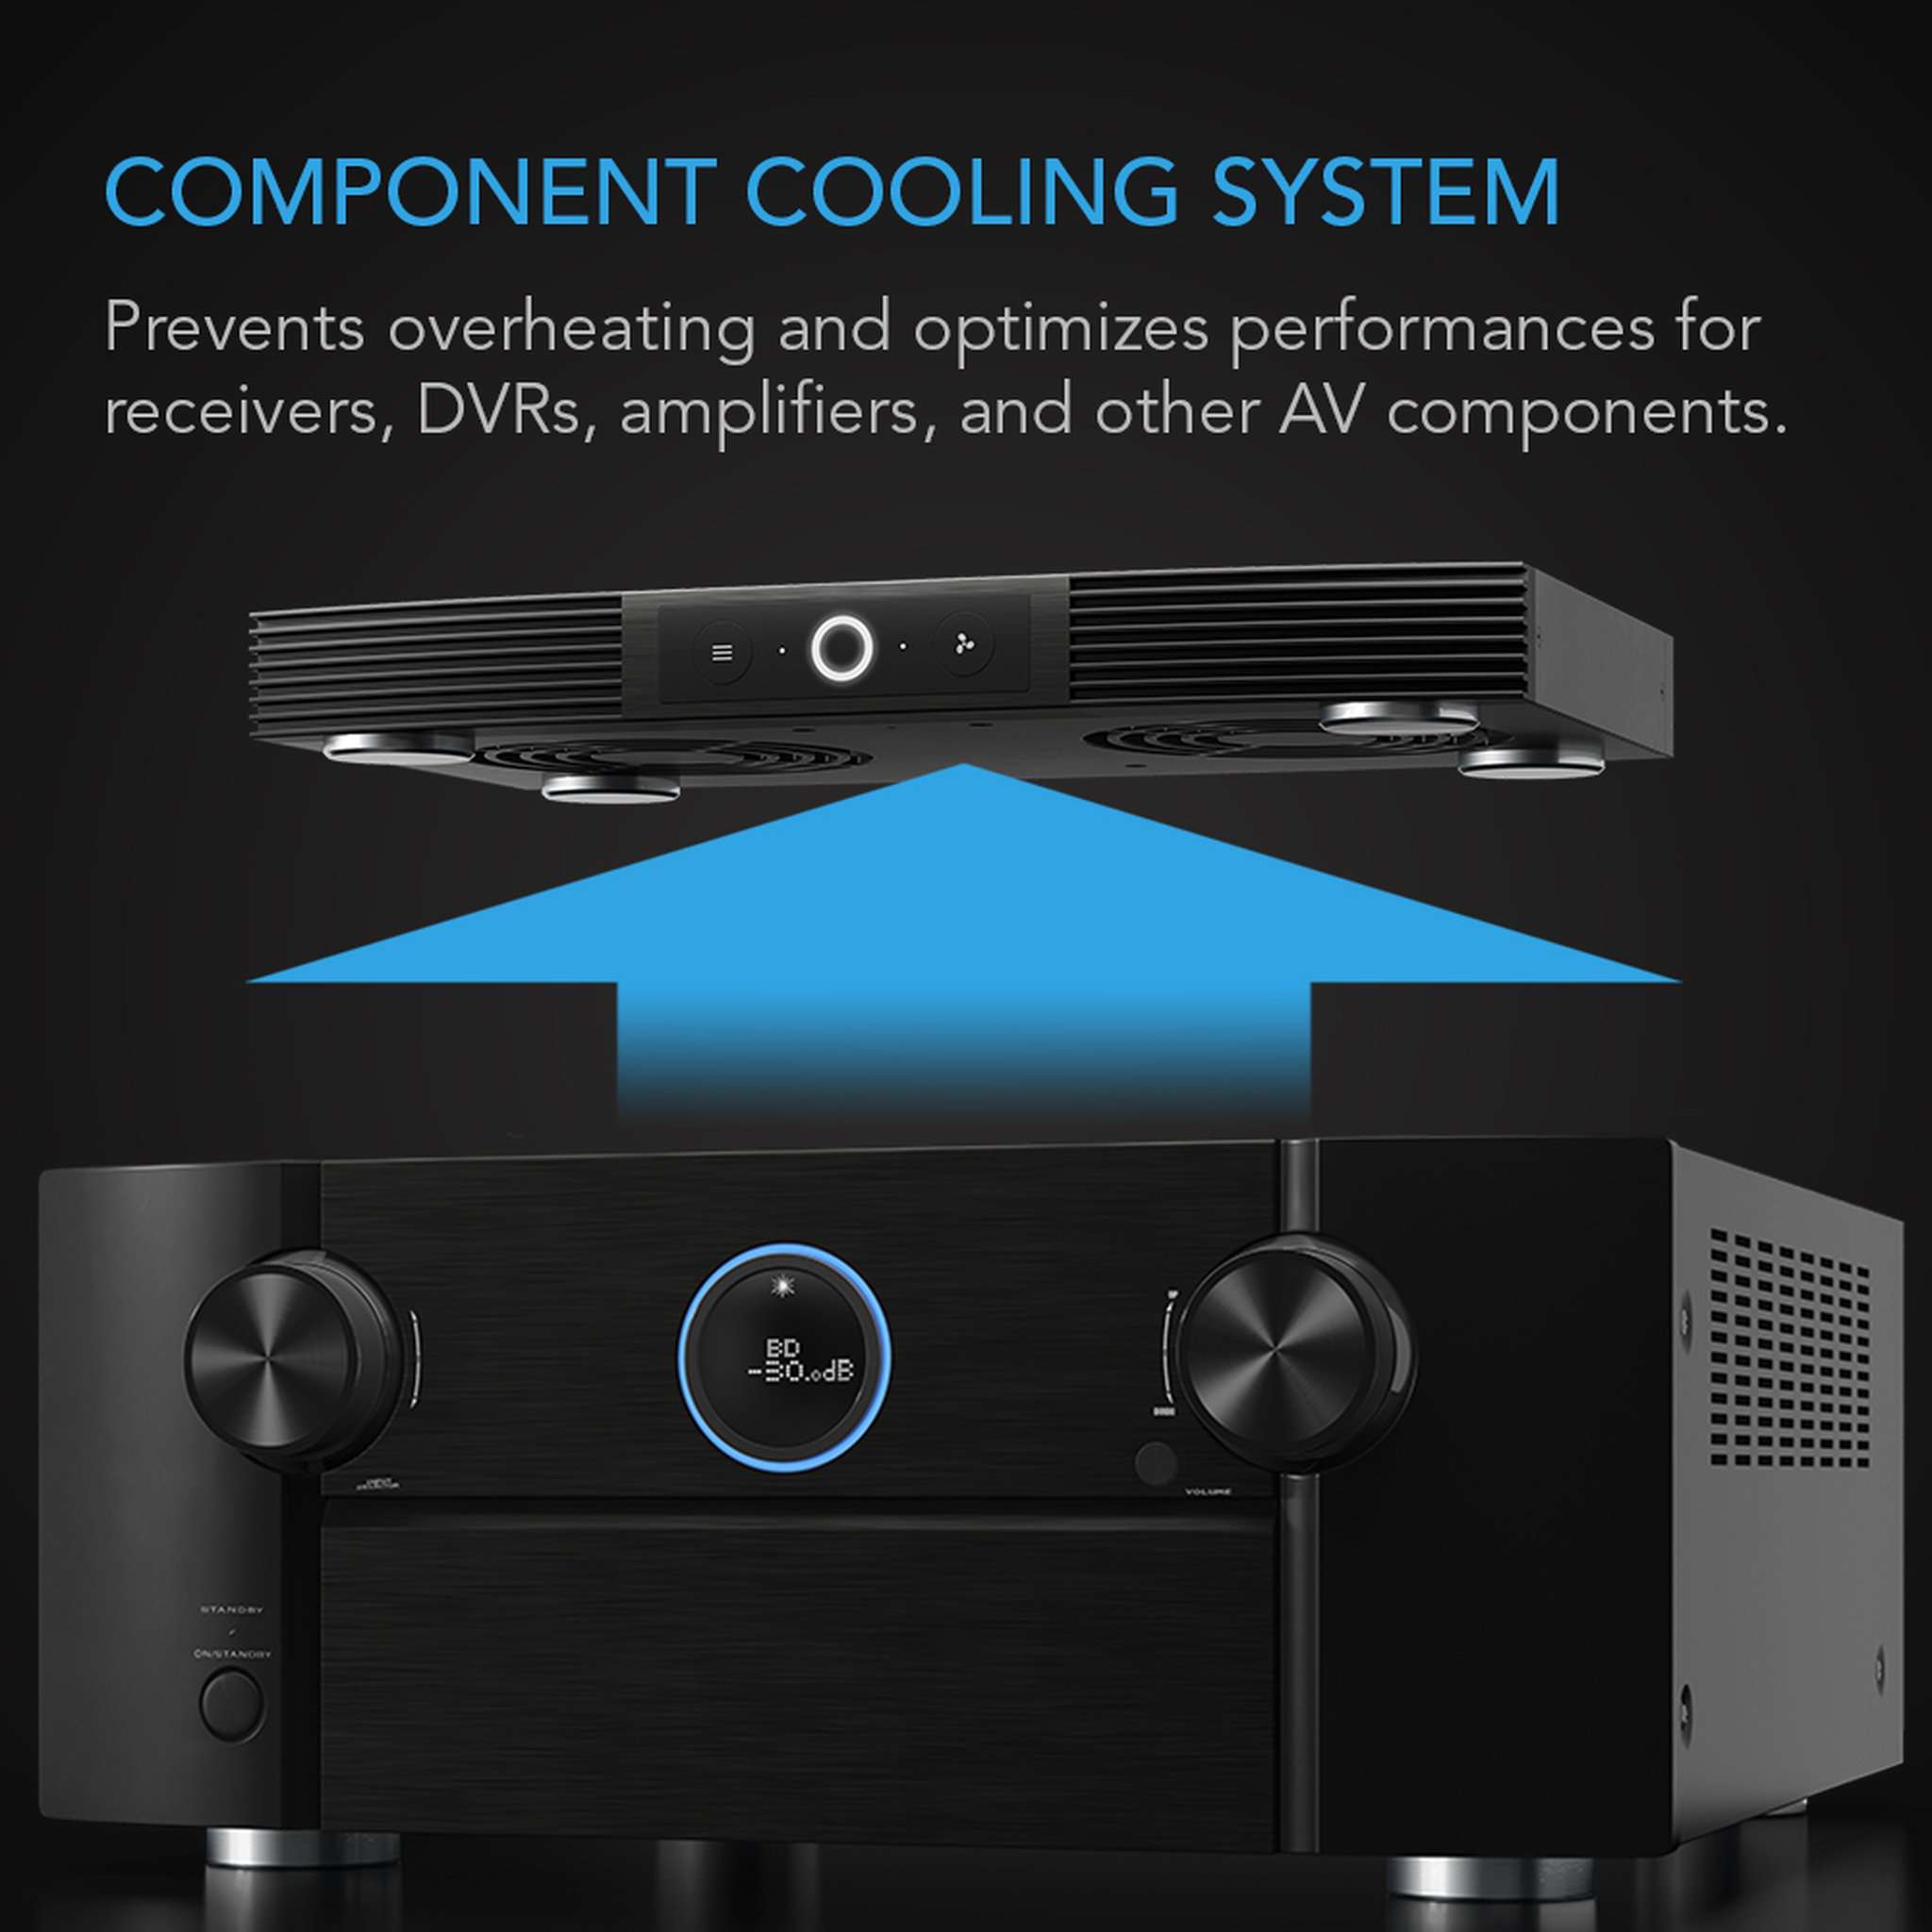 AC Infinity - Controller 67, Temperature and Humidity Fan Controller